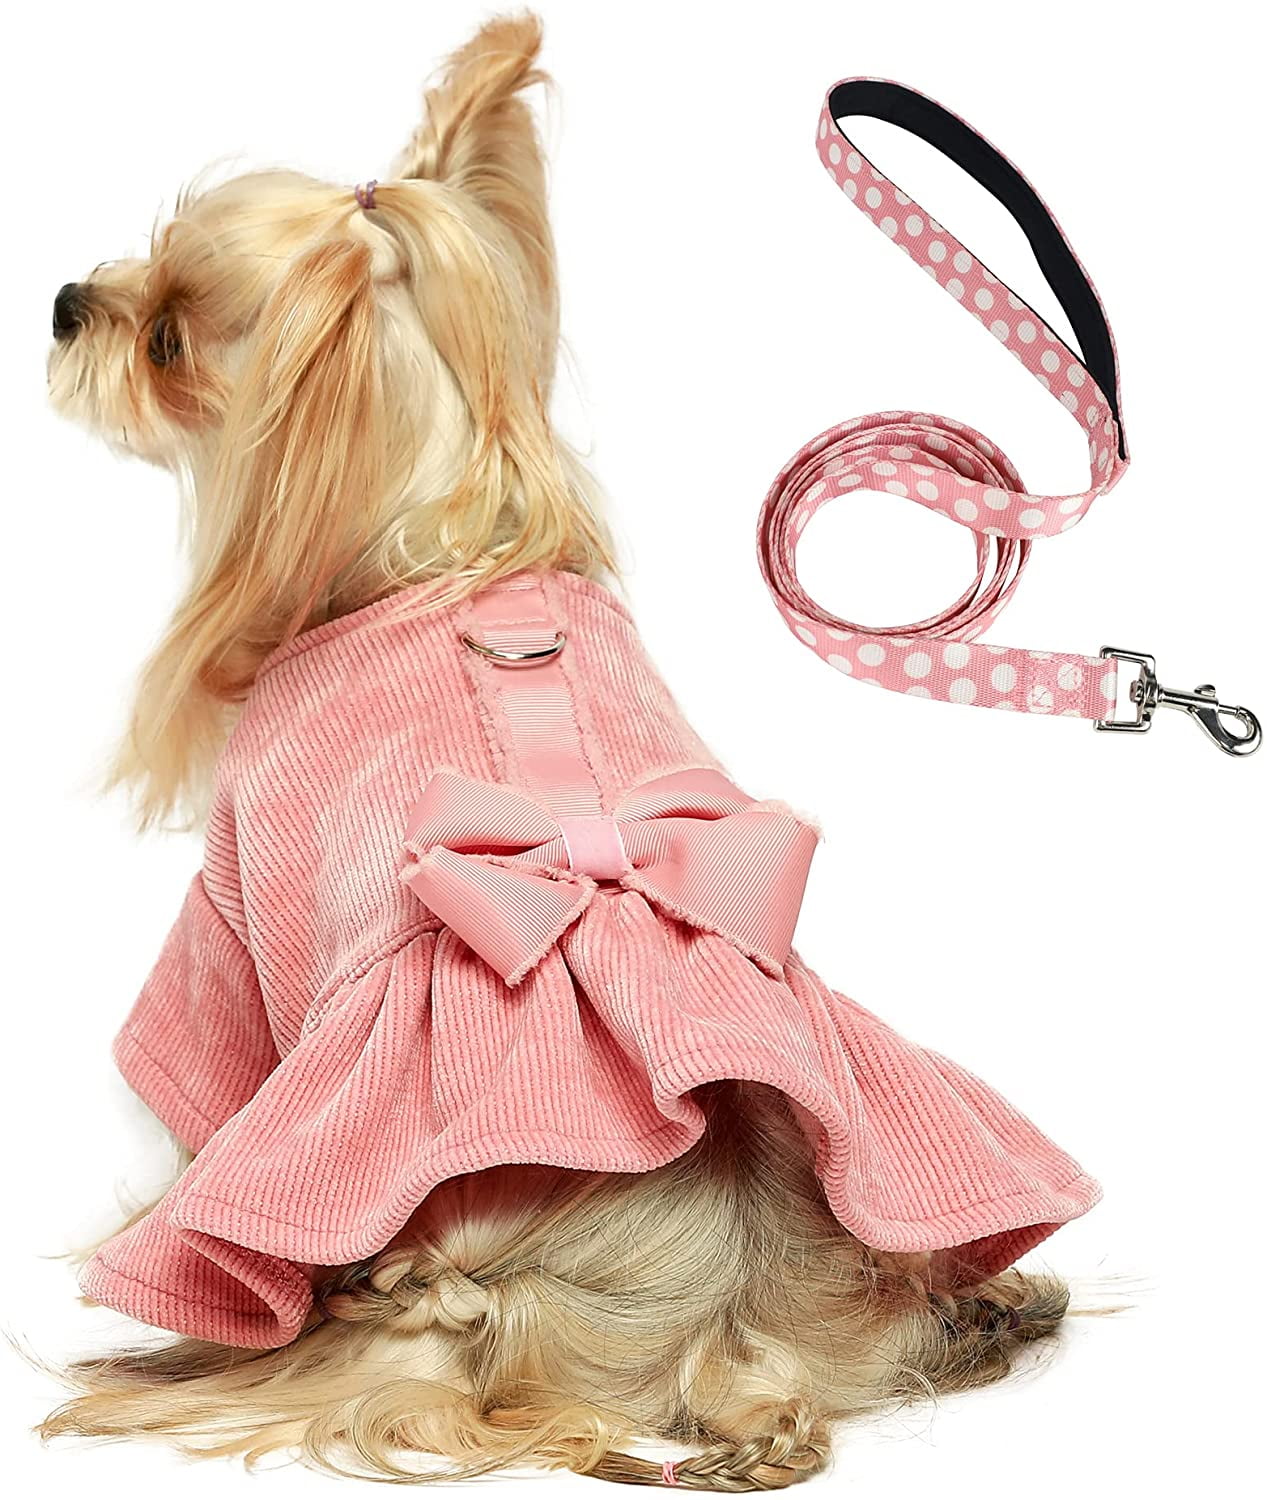 Pink Star Fleece Dog Puppy Clothes Dress Coat Choke Free Harness With Leash